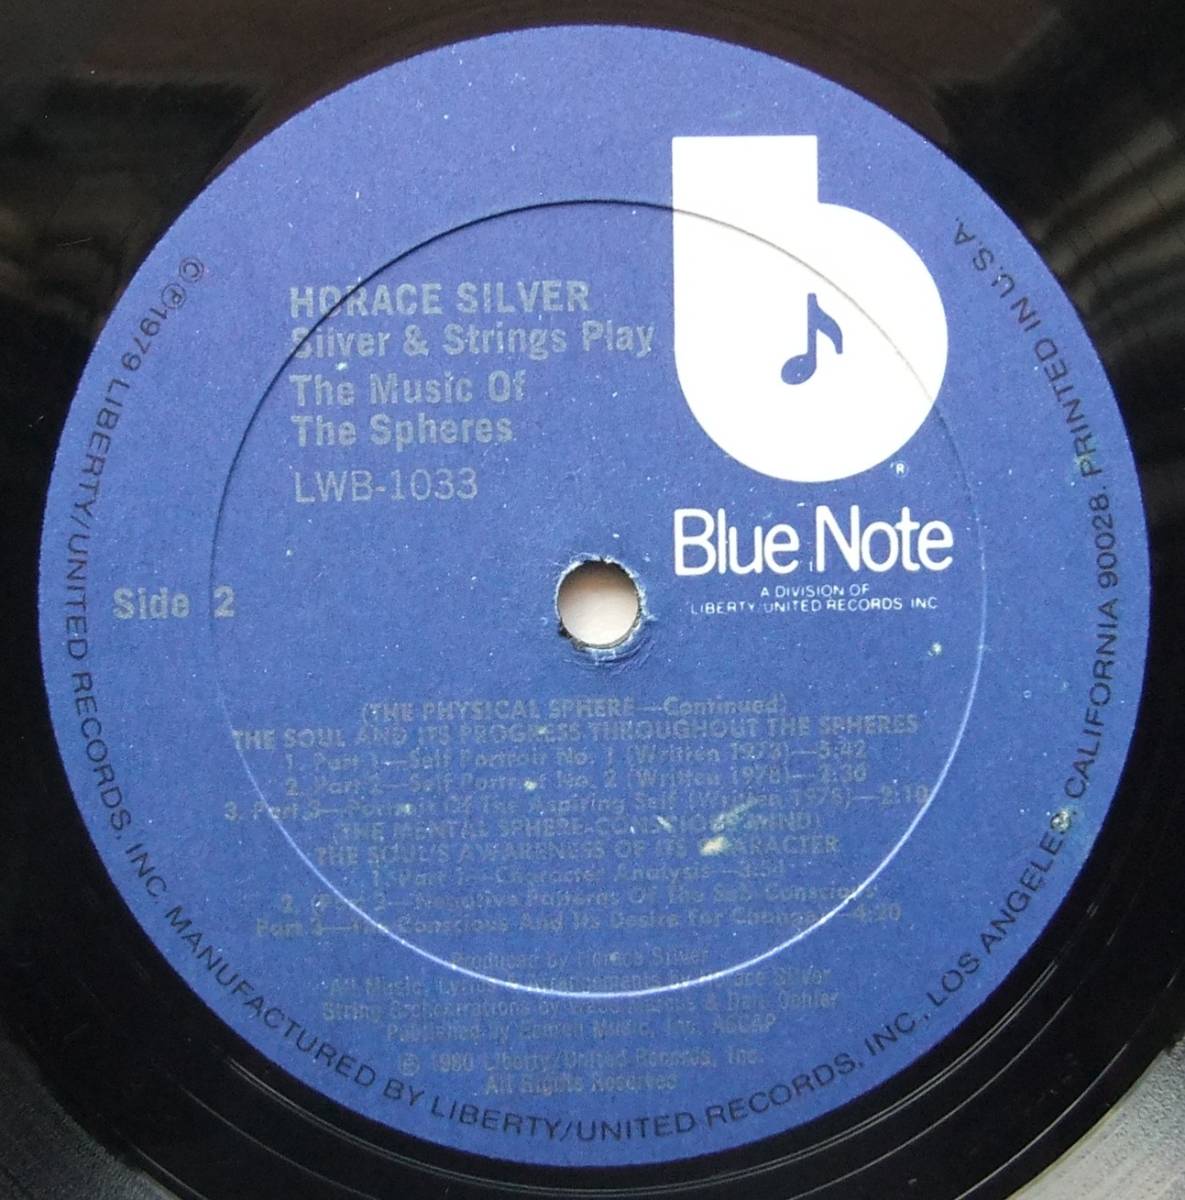 ◆ HORACE SILVER / Silver 'N Play The Music of the Spheres (2 LP) ◆ Blue Note LWB-1033 ◆ V